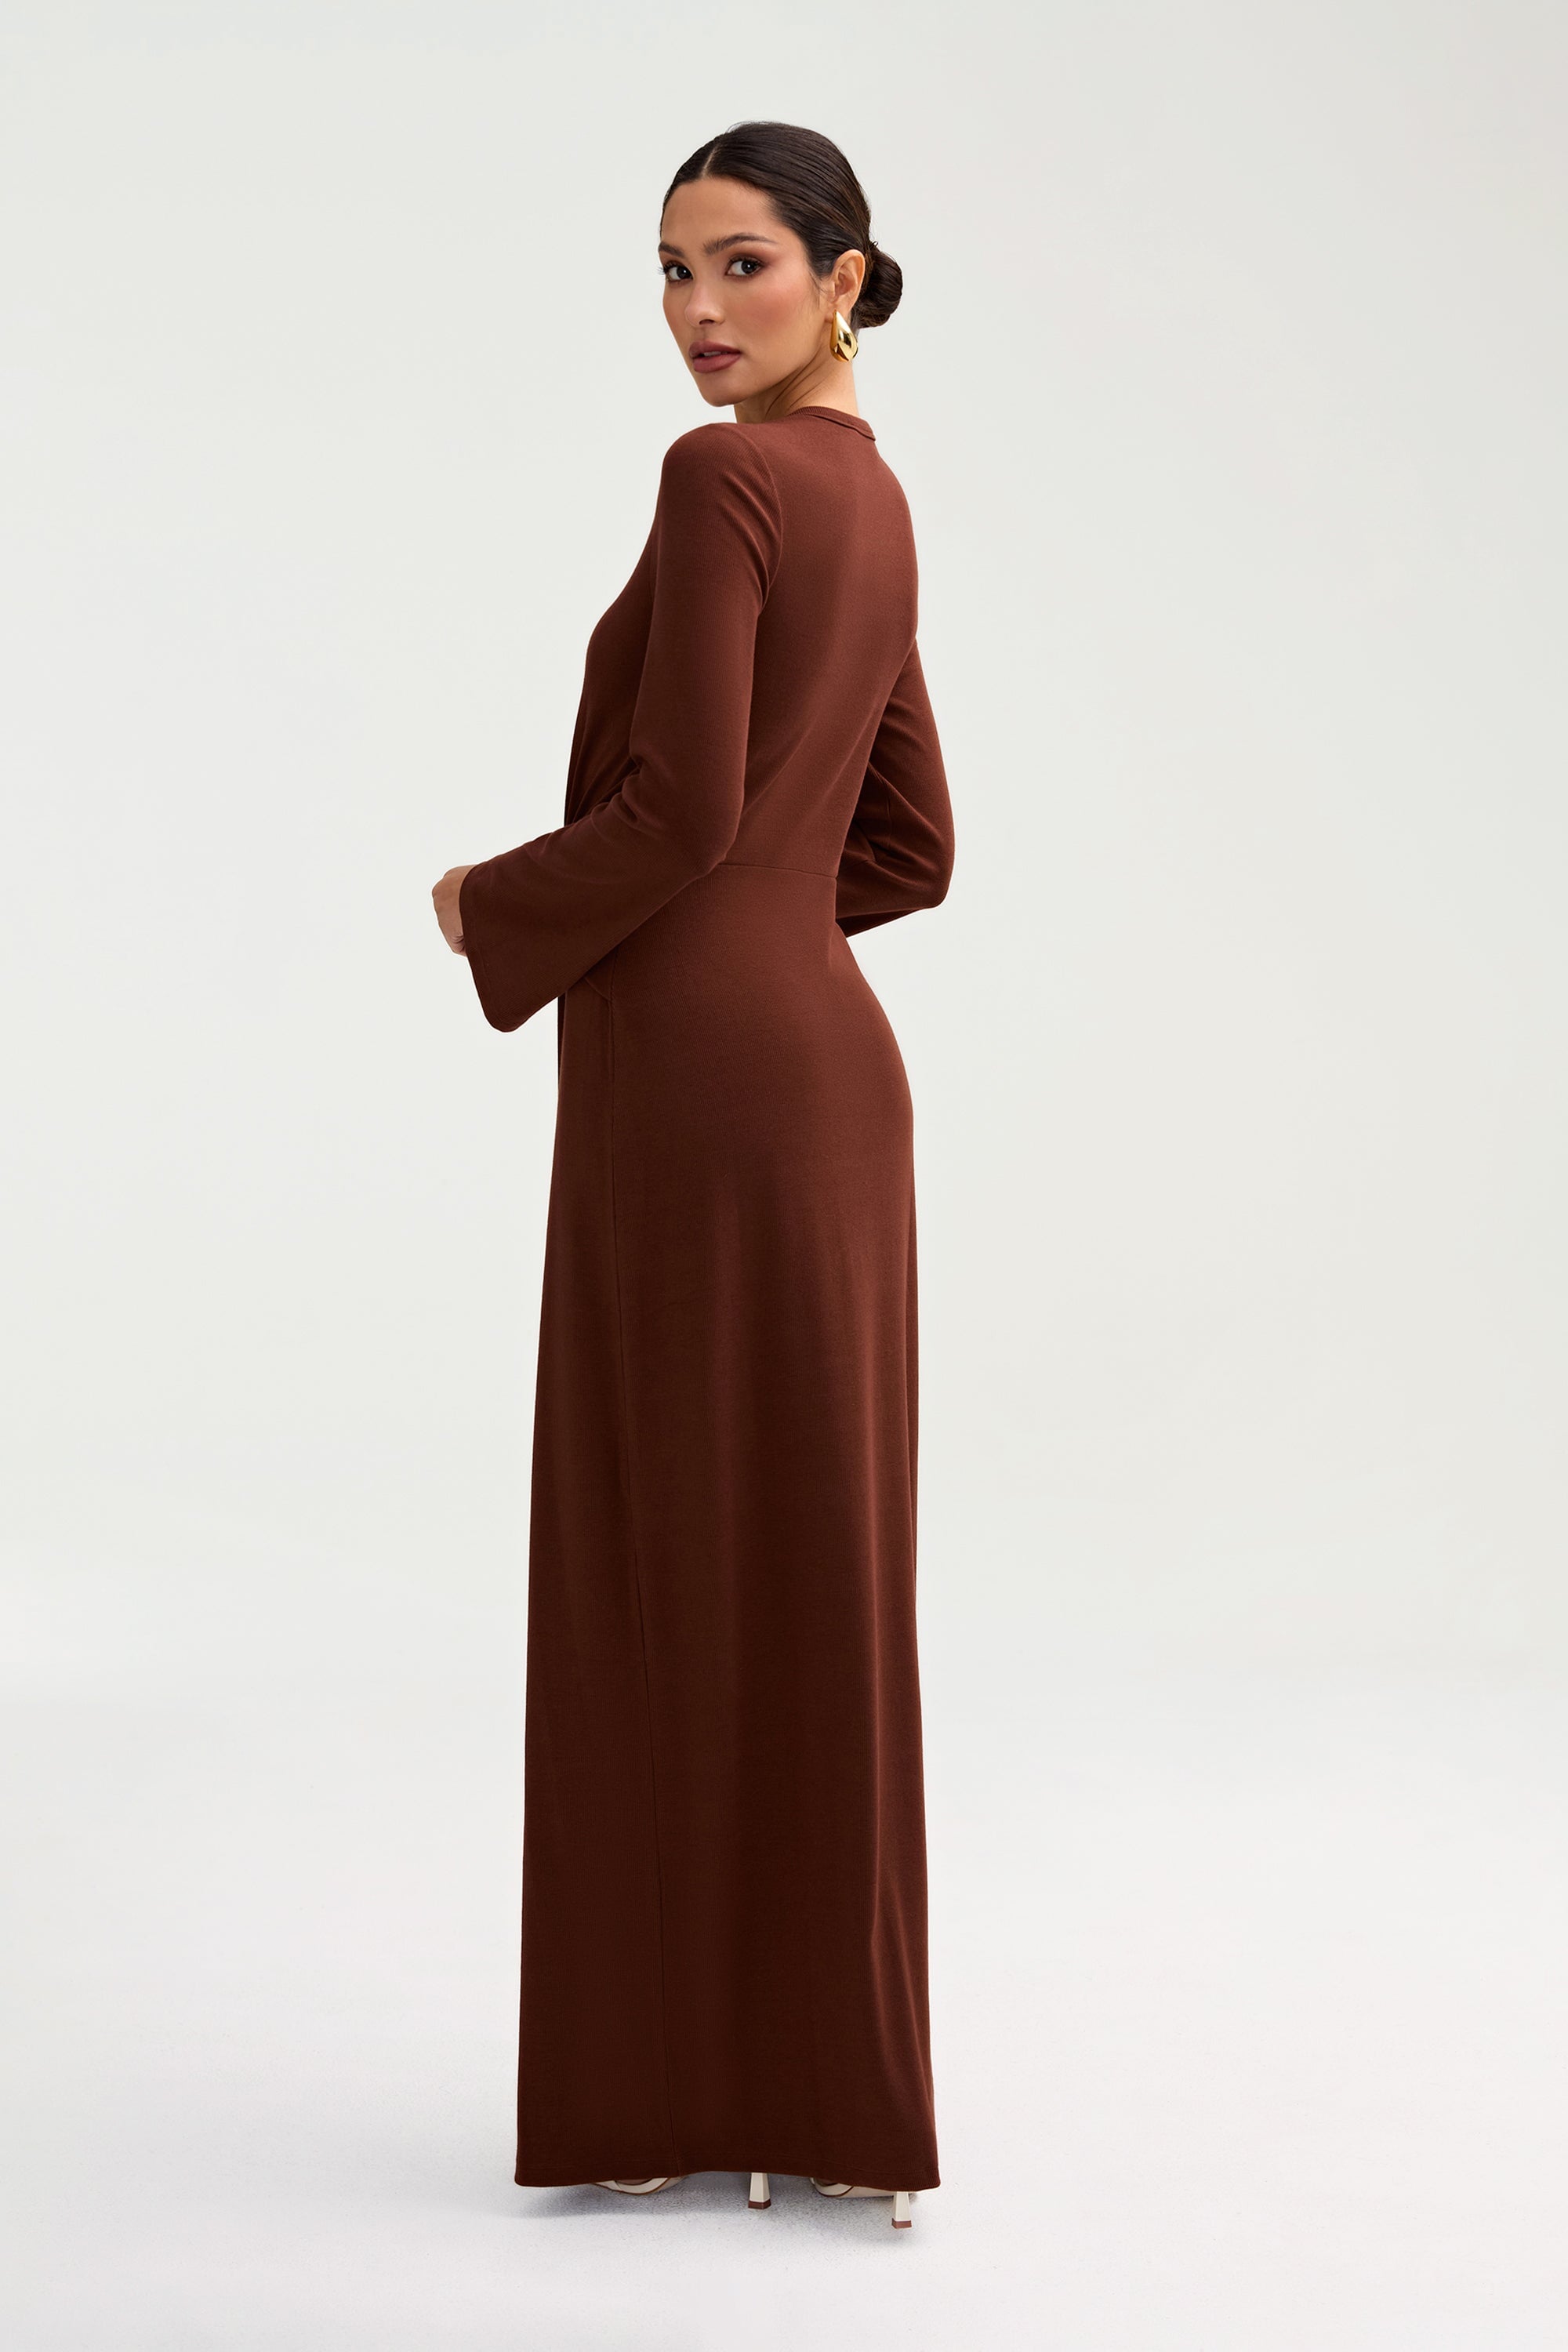 Aissia Ribbed Twist Front Maxi Dress - Chocolate Clothing epschoolboard 